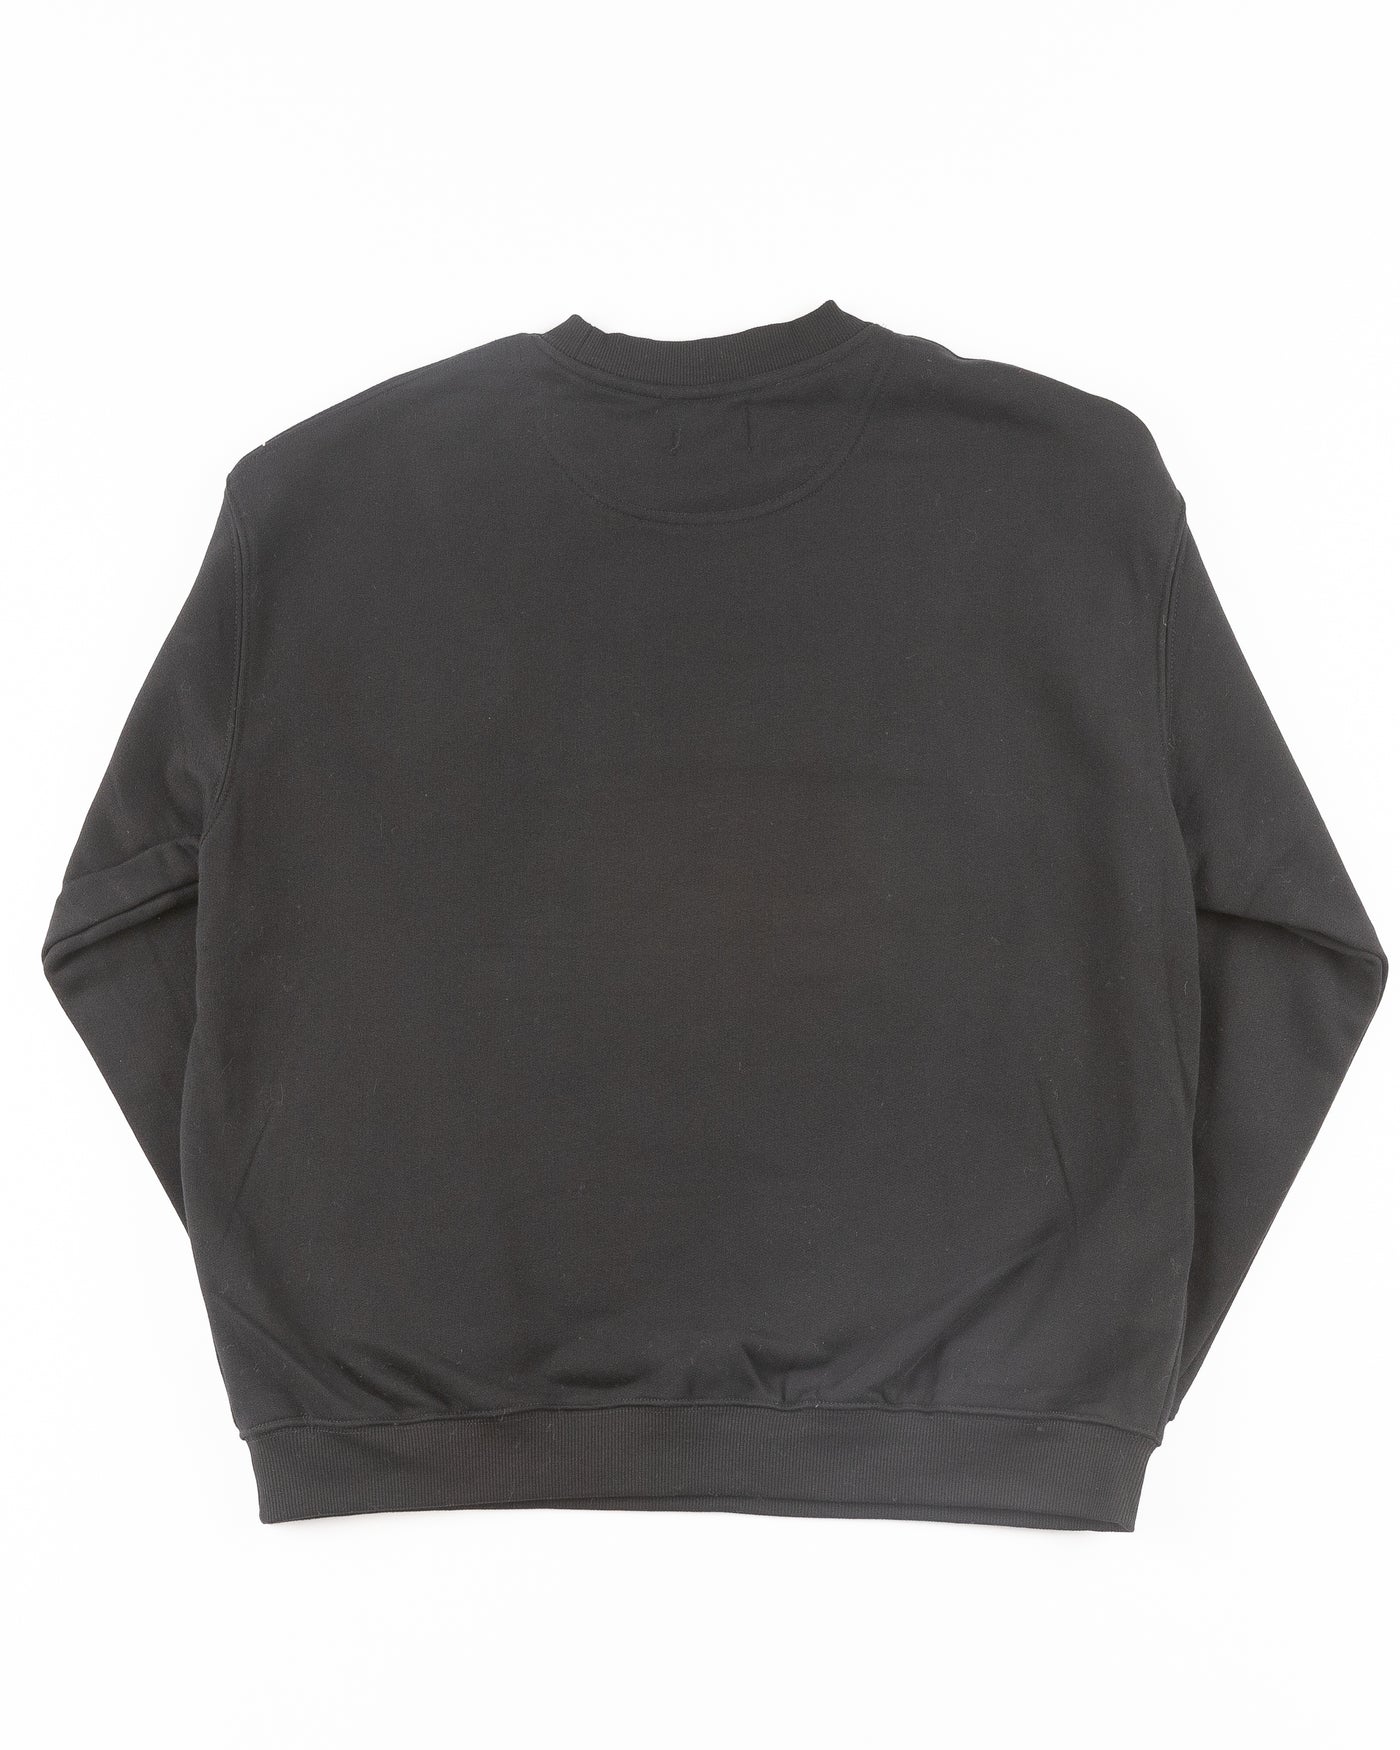 black Line Change crewneck with chenille Blackhawks embroidery across front - back lay flat